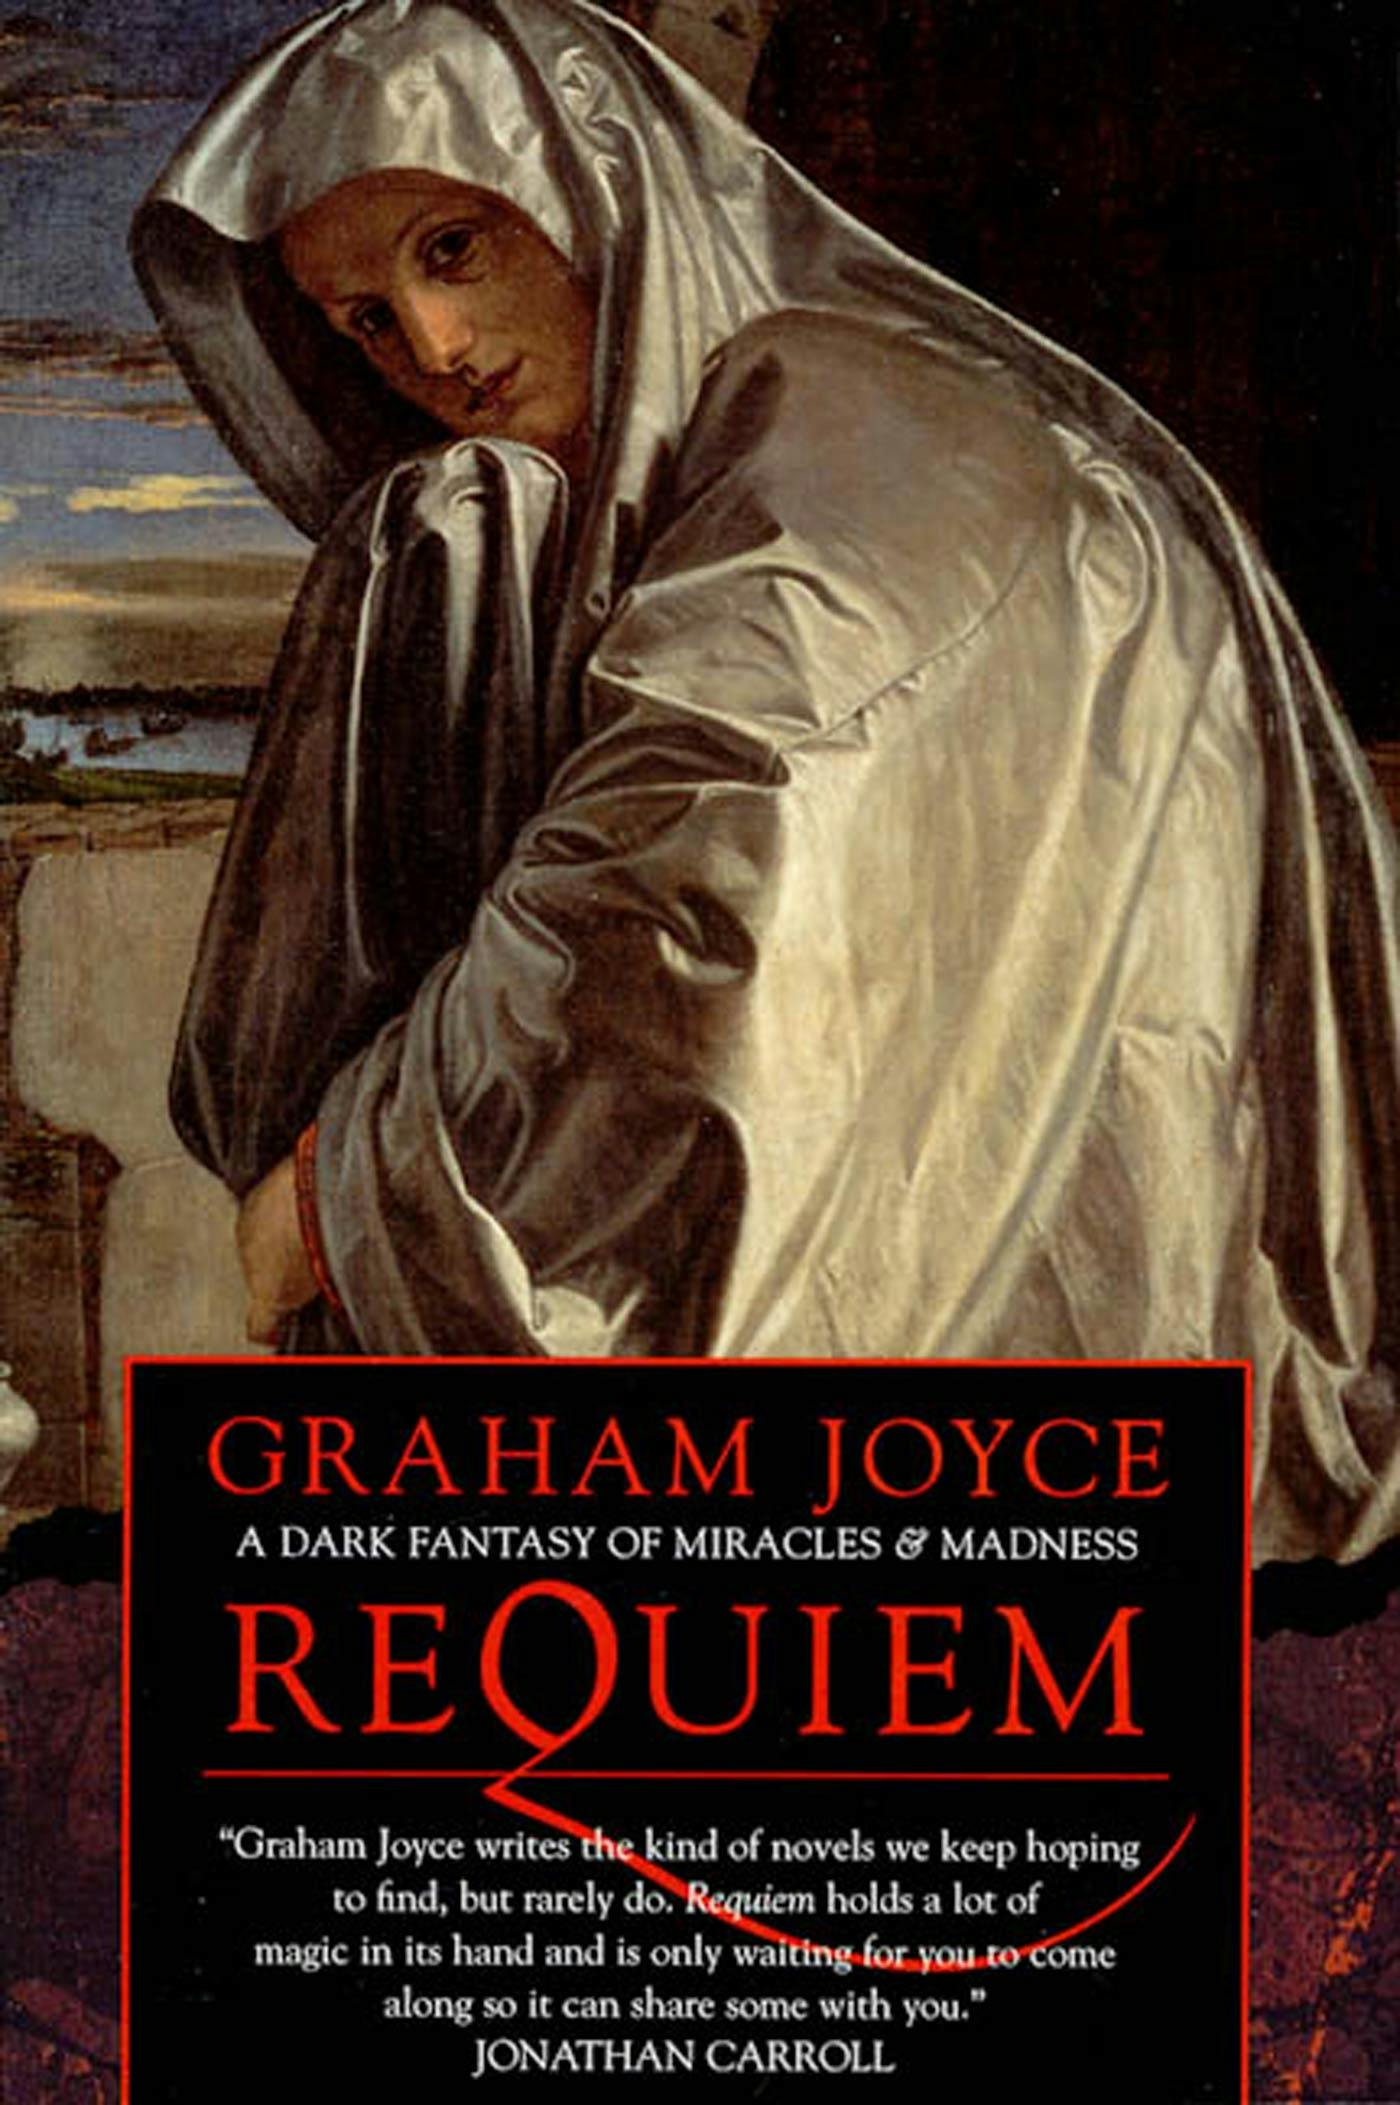 Cover for the book titled as: Requiem